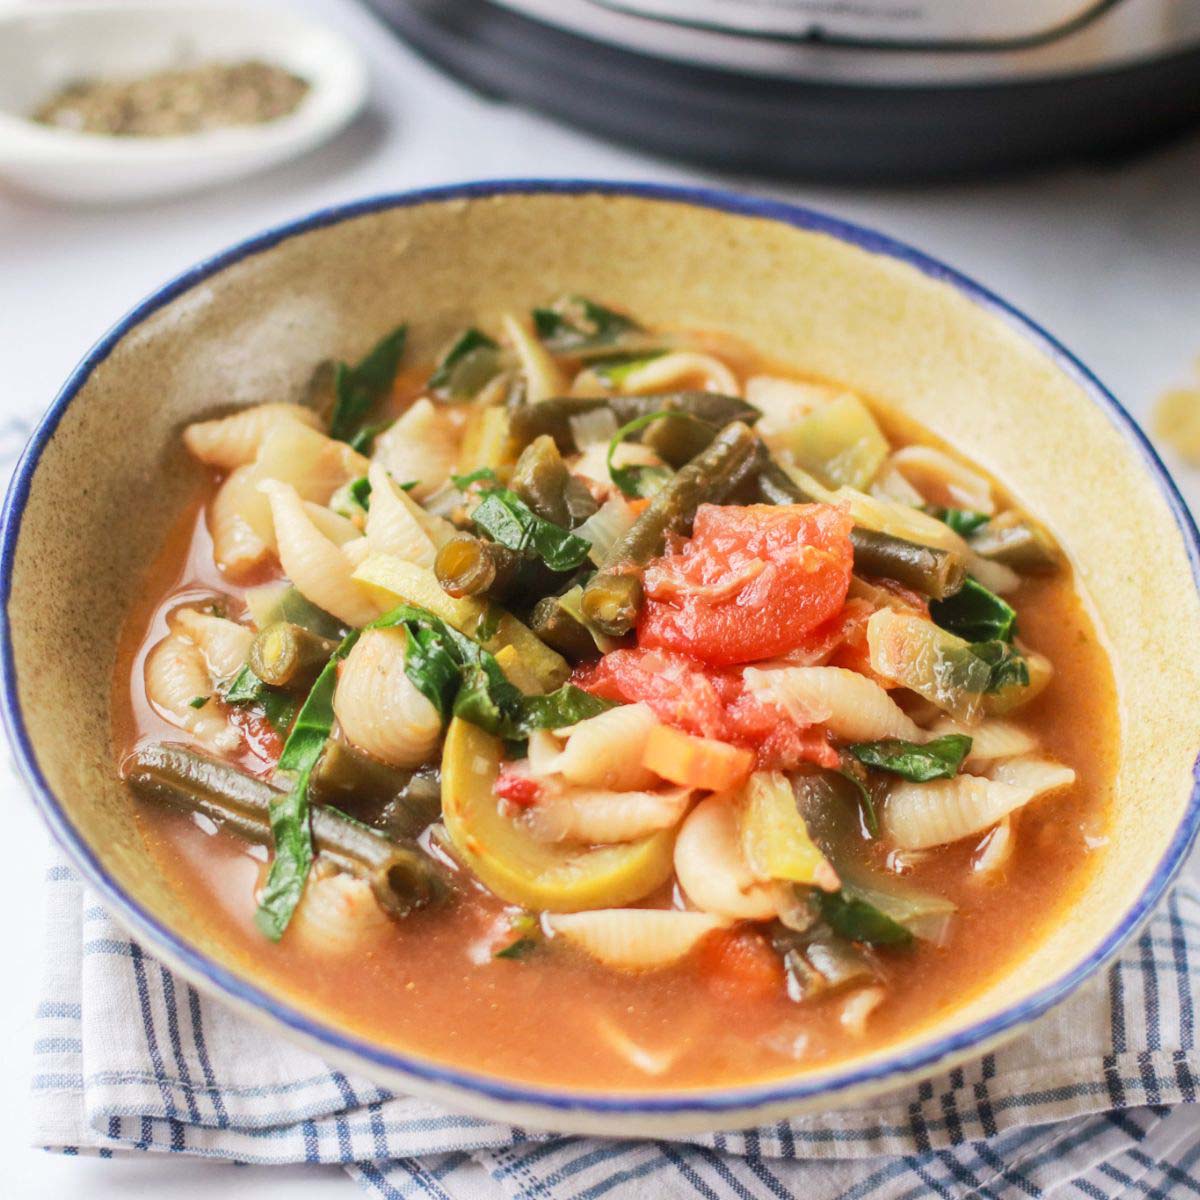 Thumbnail of Instant Pot vegetable soup with pasta.